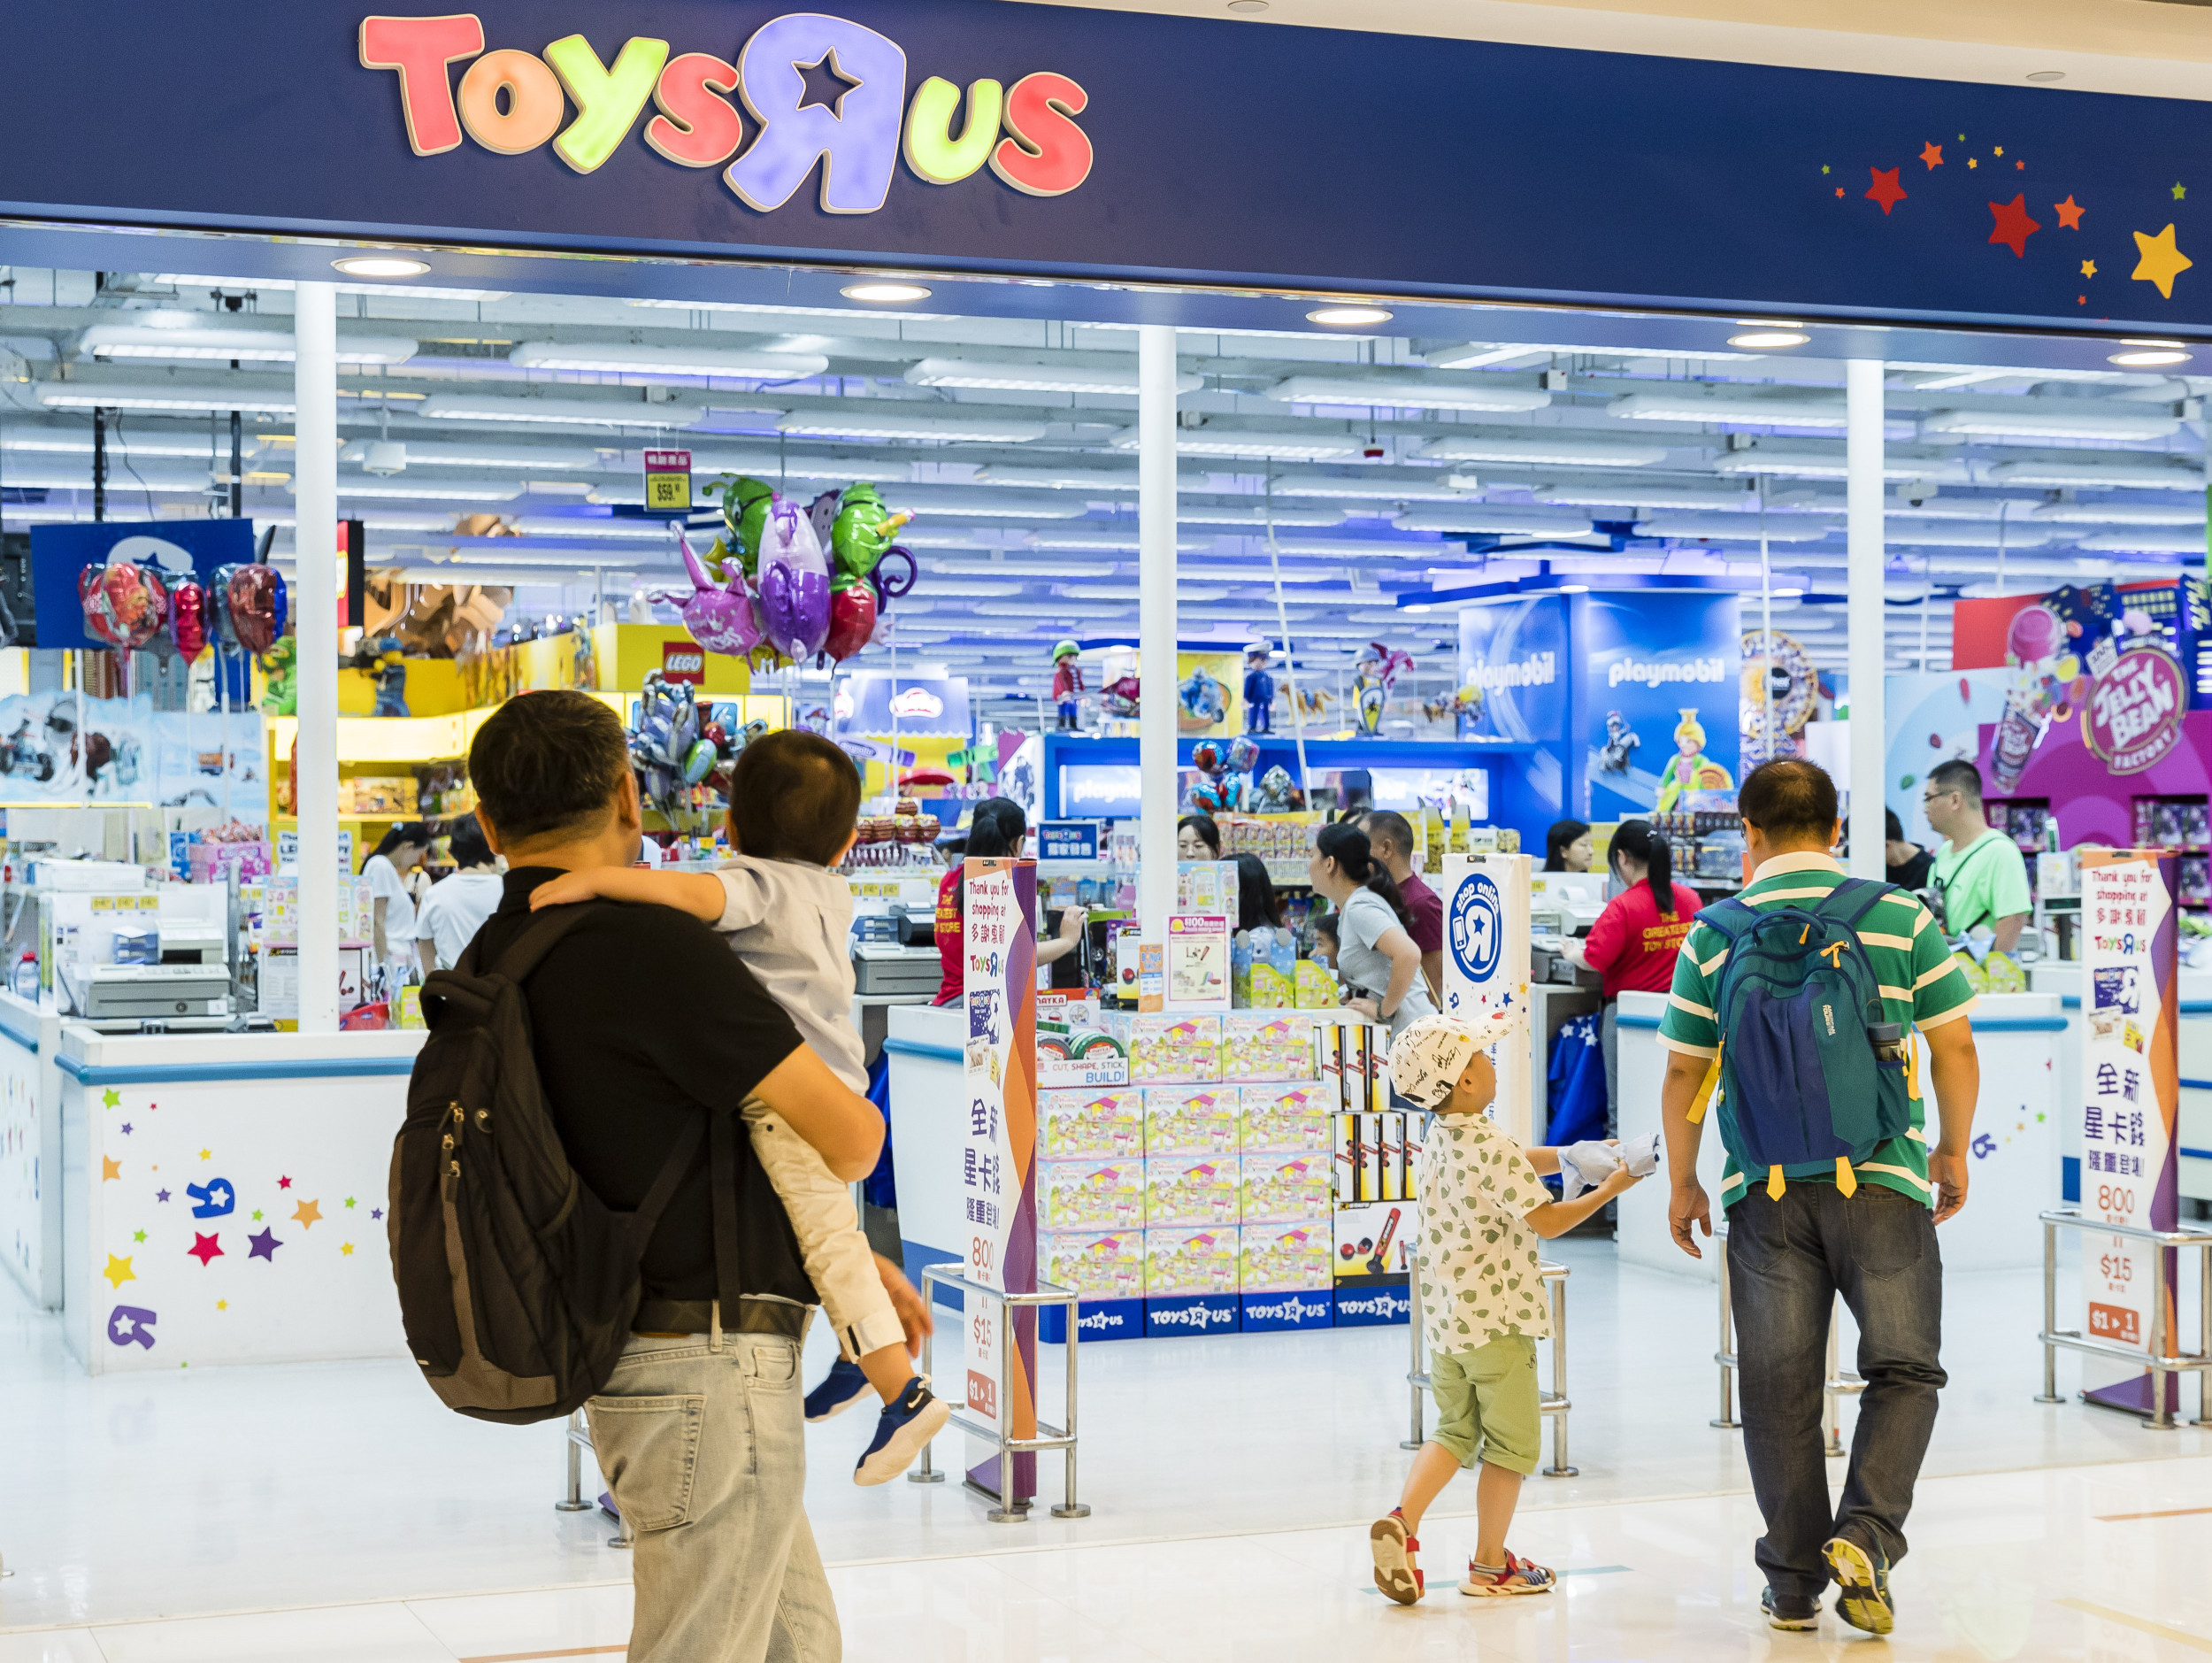 Is Toys 'R' Us Coming Back? Latest Updates on Children's Store